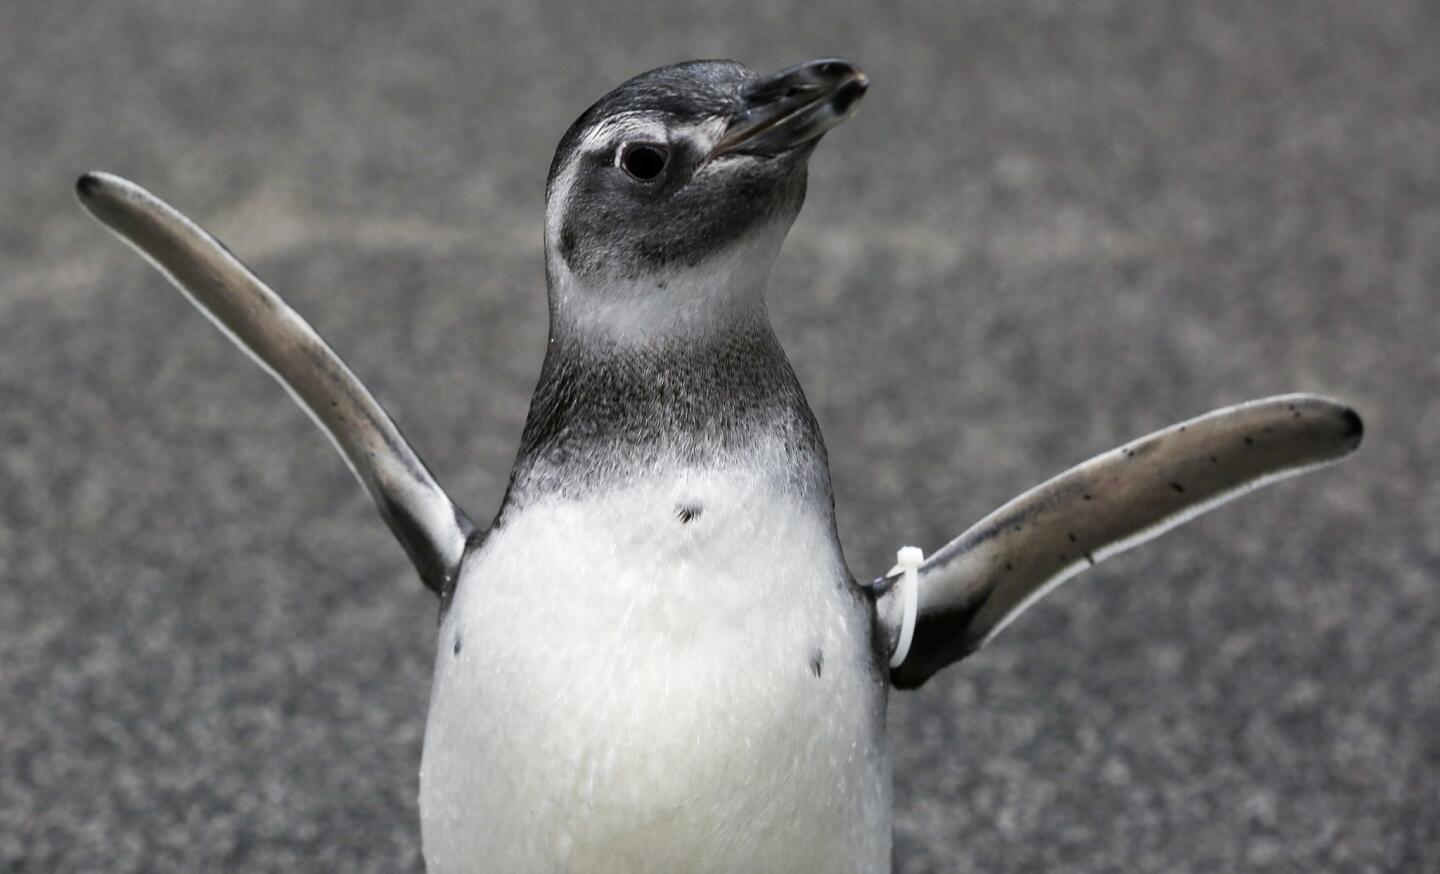 One of the two male Magellanic penguin chicks that was hatched at the Aquarium of the Pacific in Long Beach flaps his wings before joining the rest of the penguins in the June Keyes Penguin Habitat on Thursday.